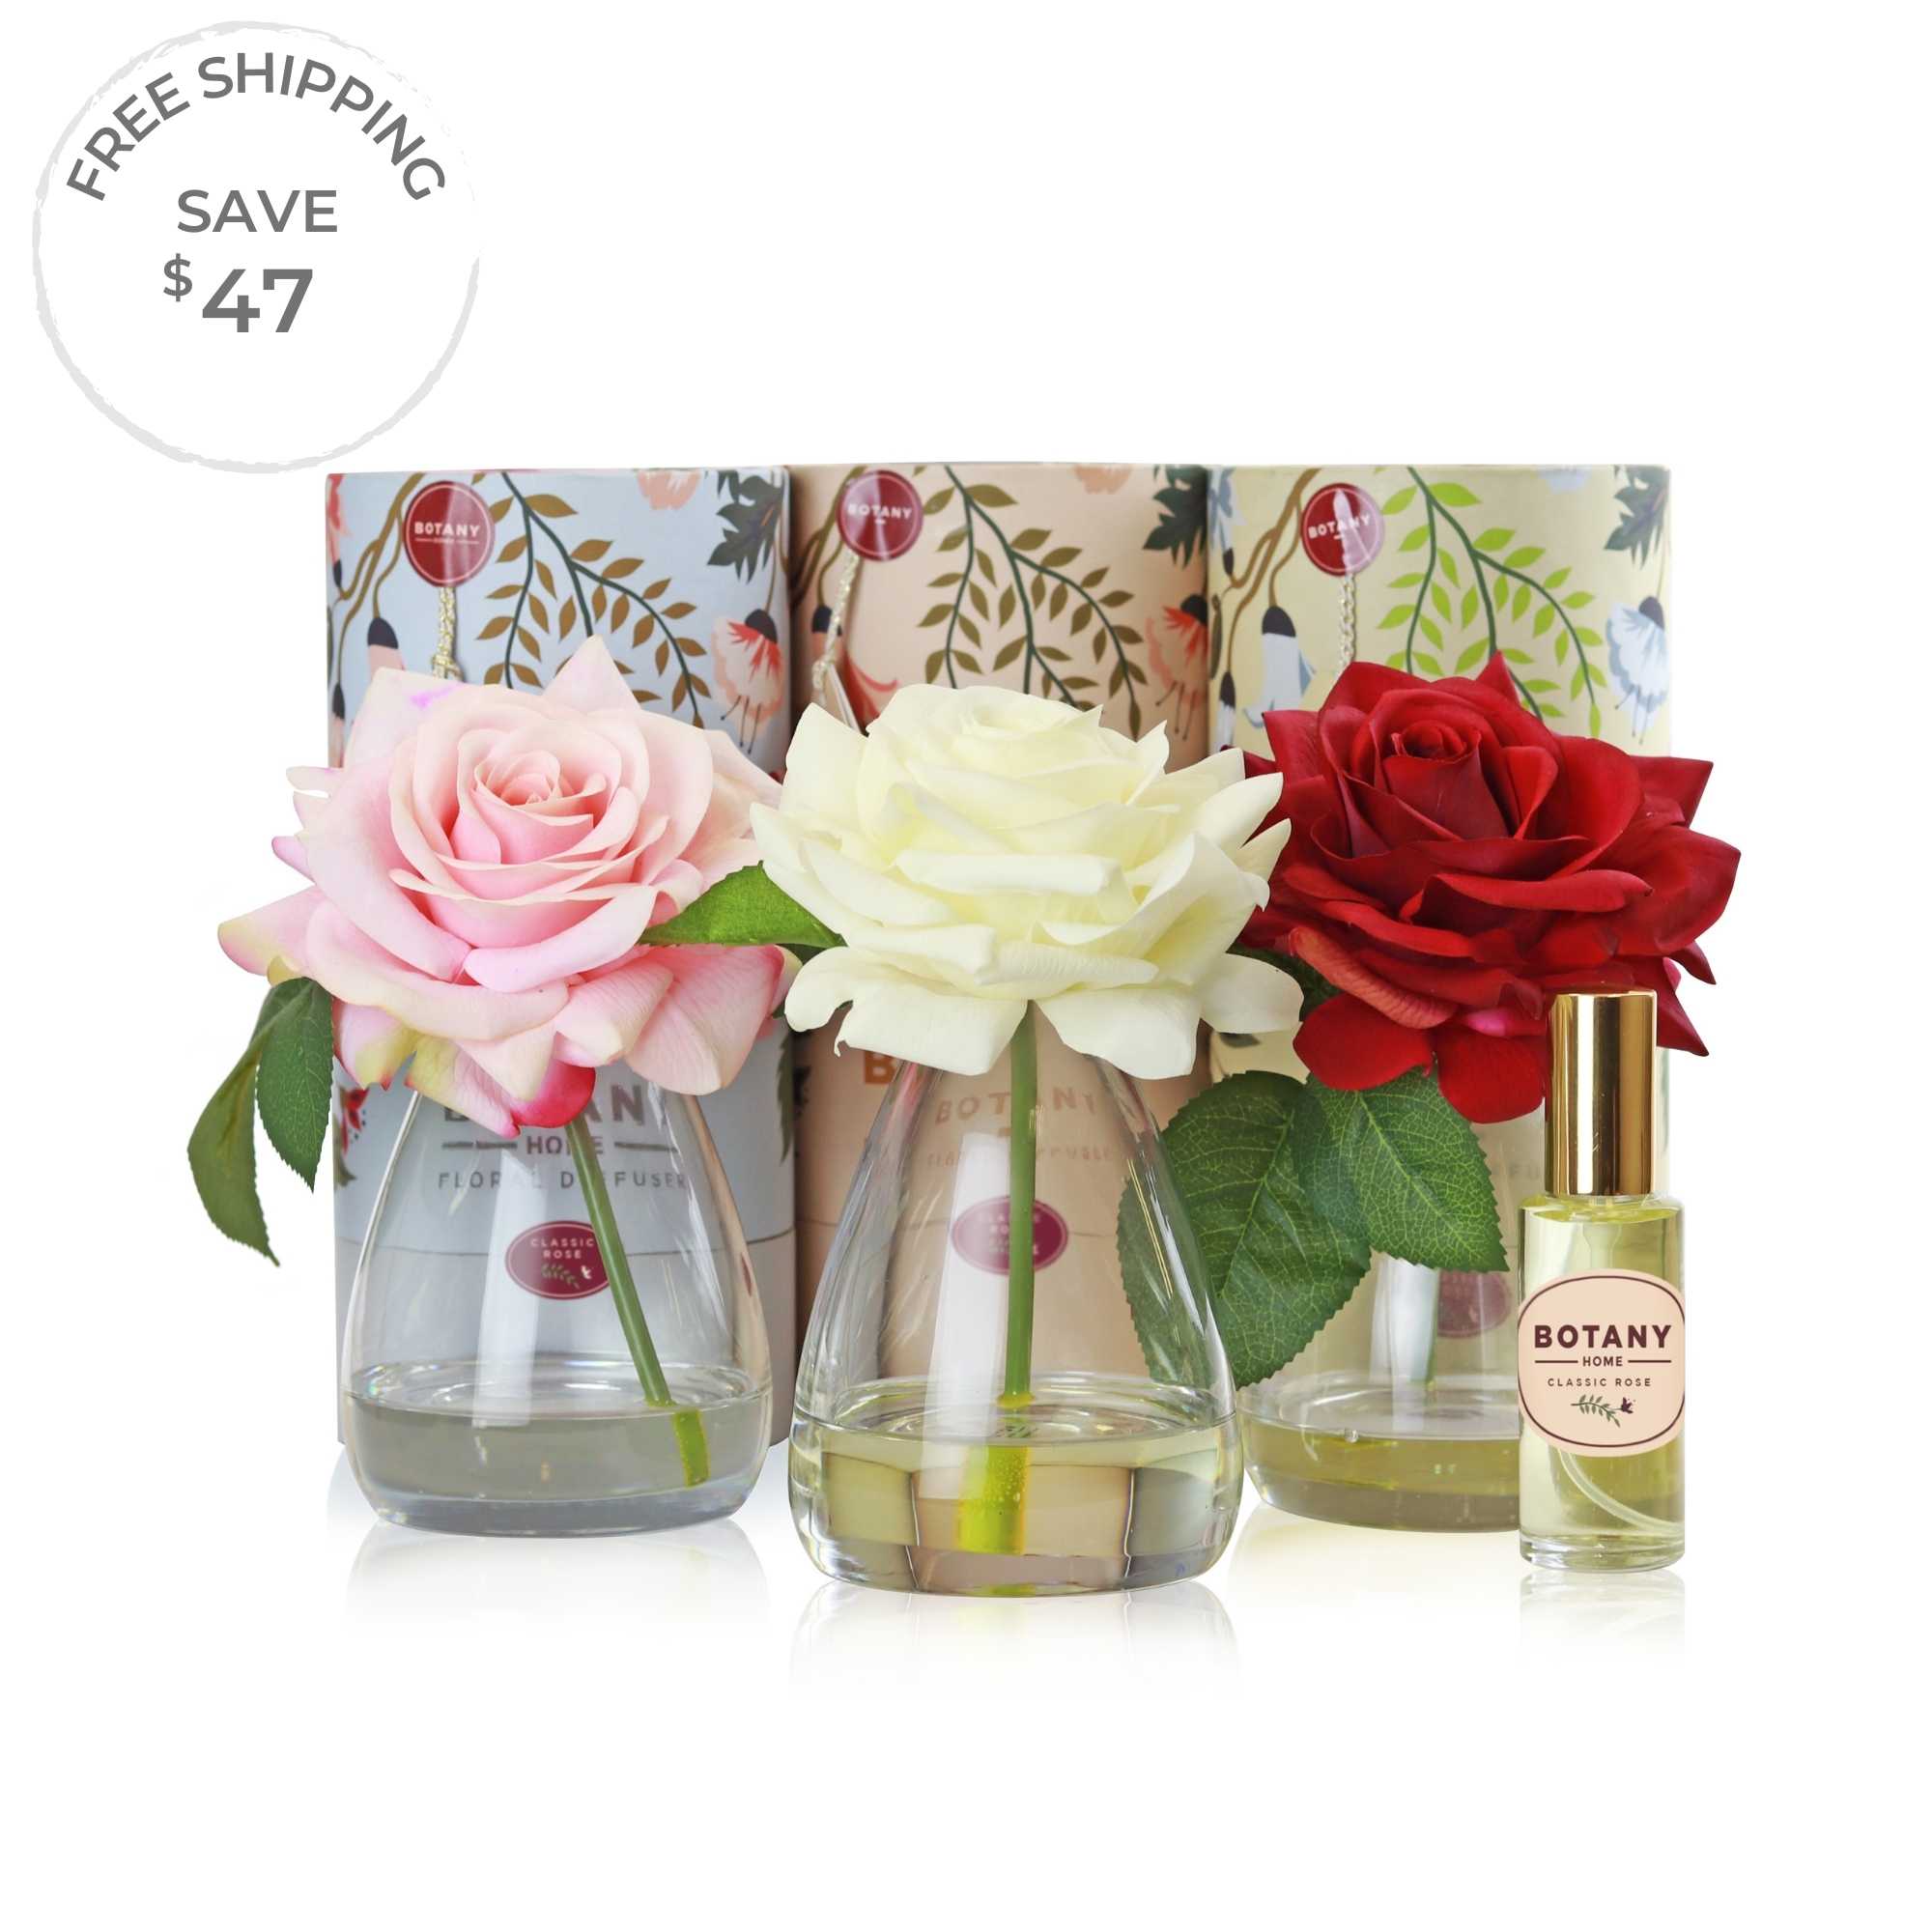 A set of 3 artificial rose arrangements with accompanying floral scent sprays sold as a set of 3